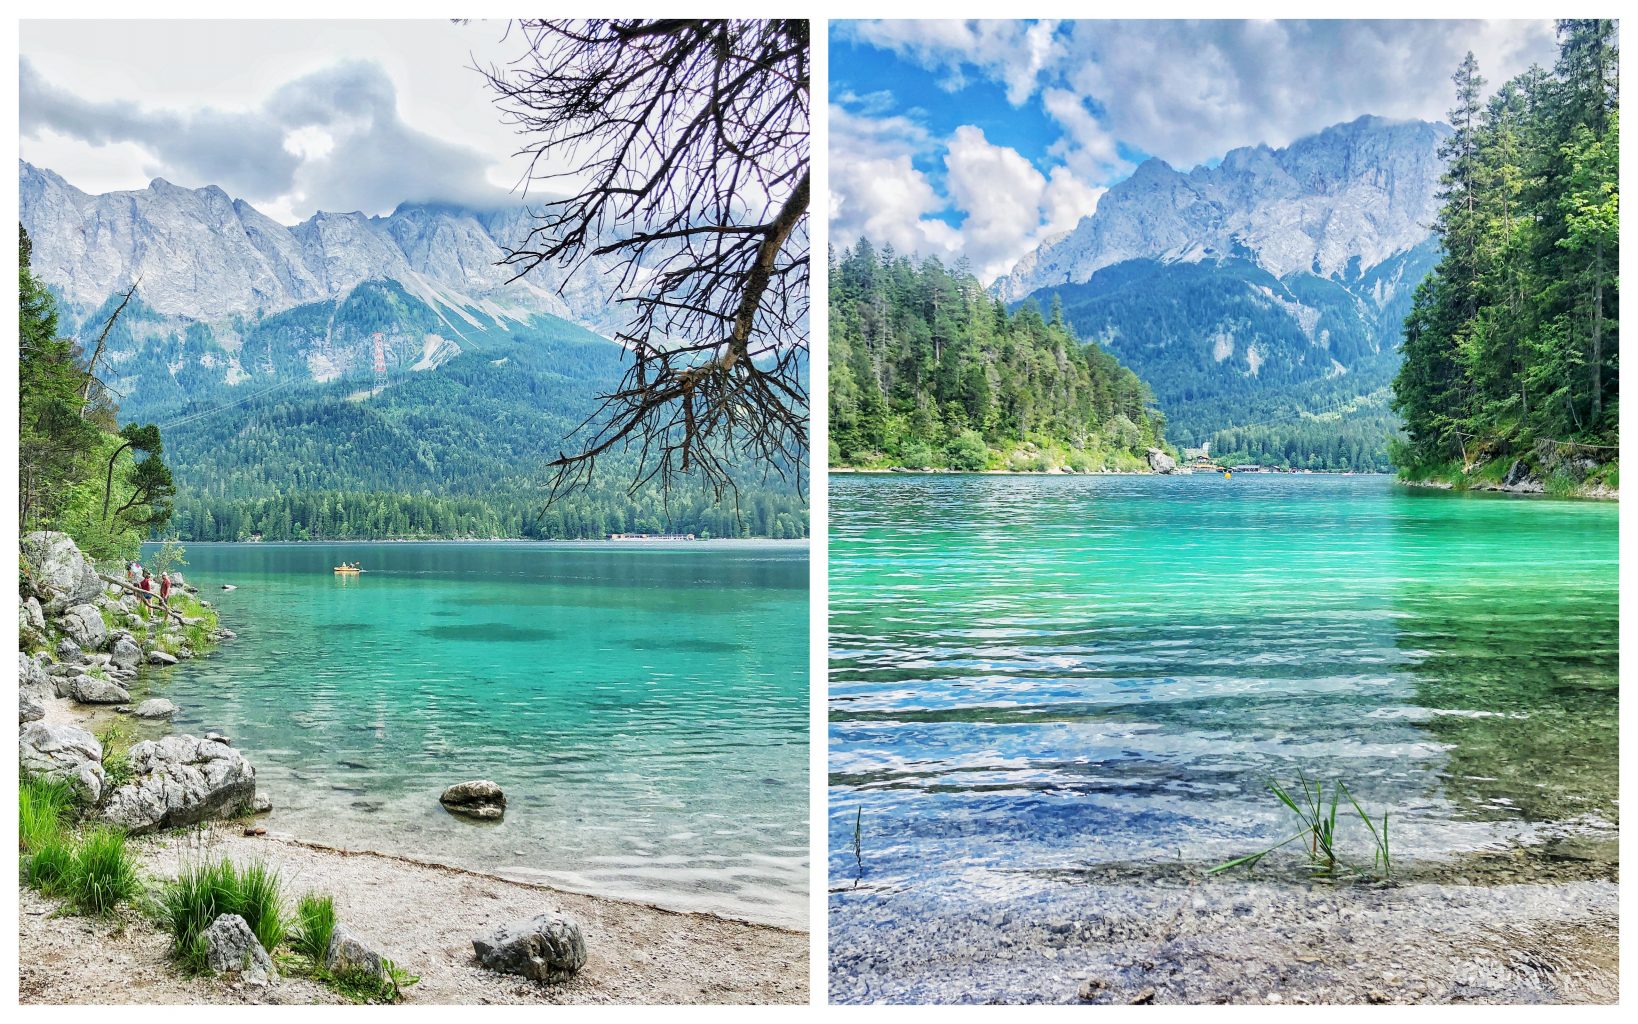 Things to do in Eibsee lake, Germany